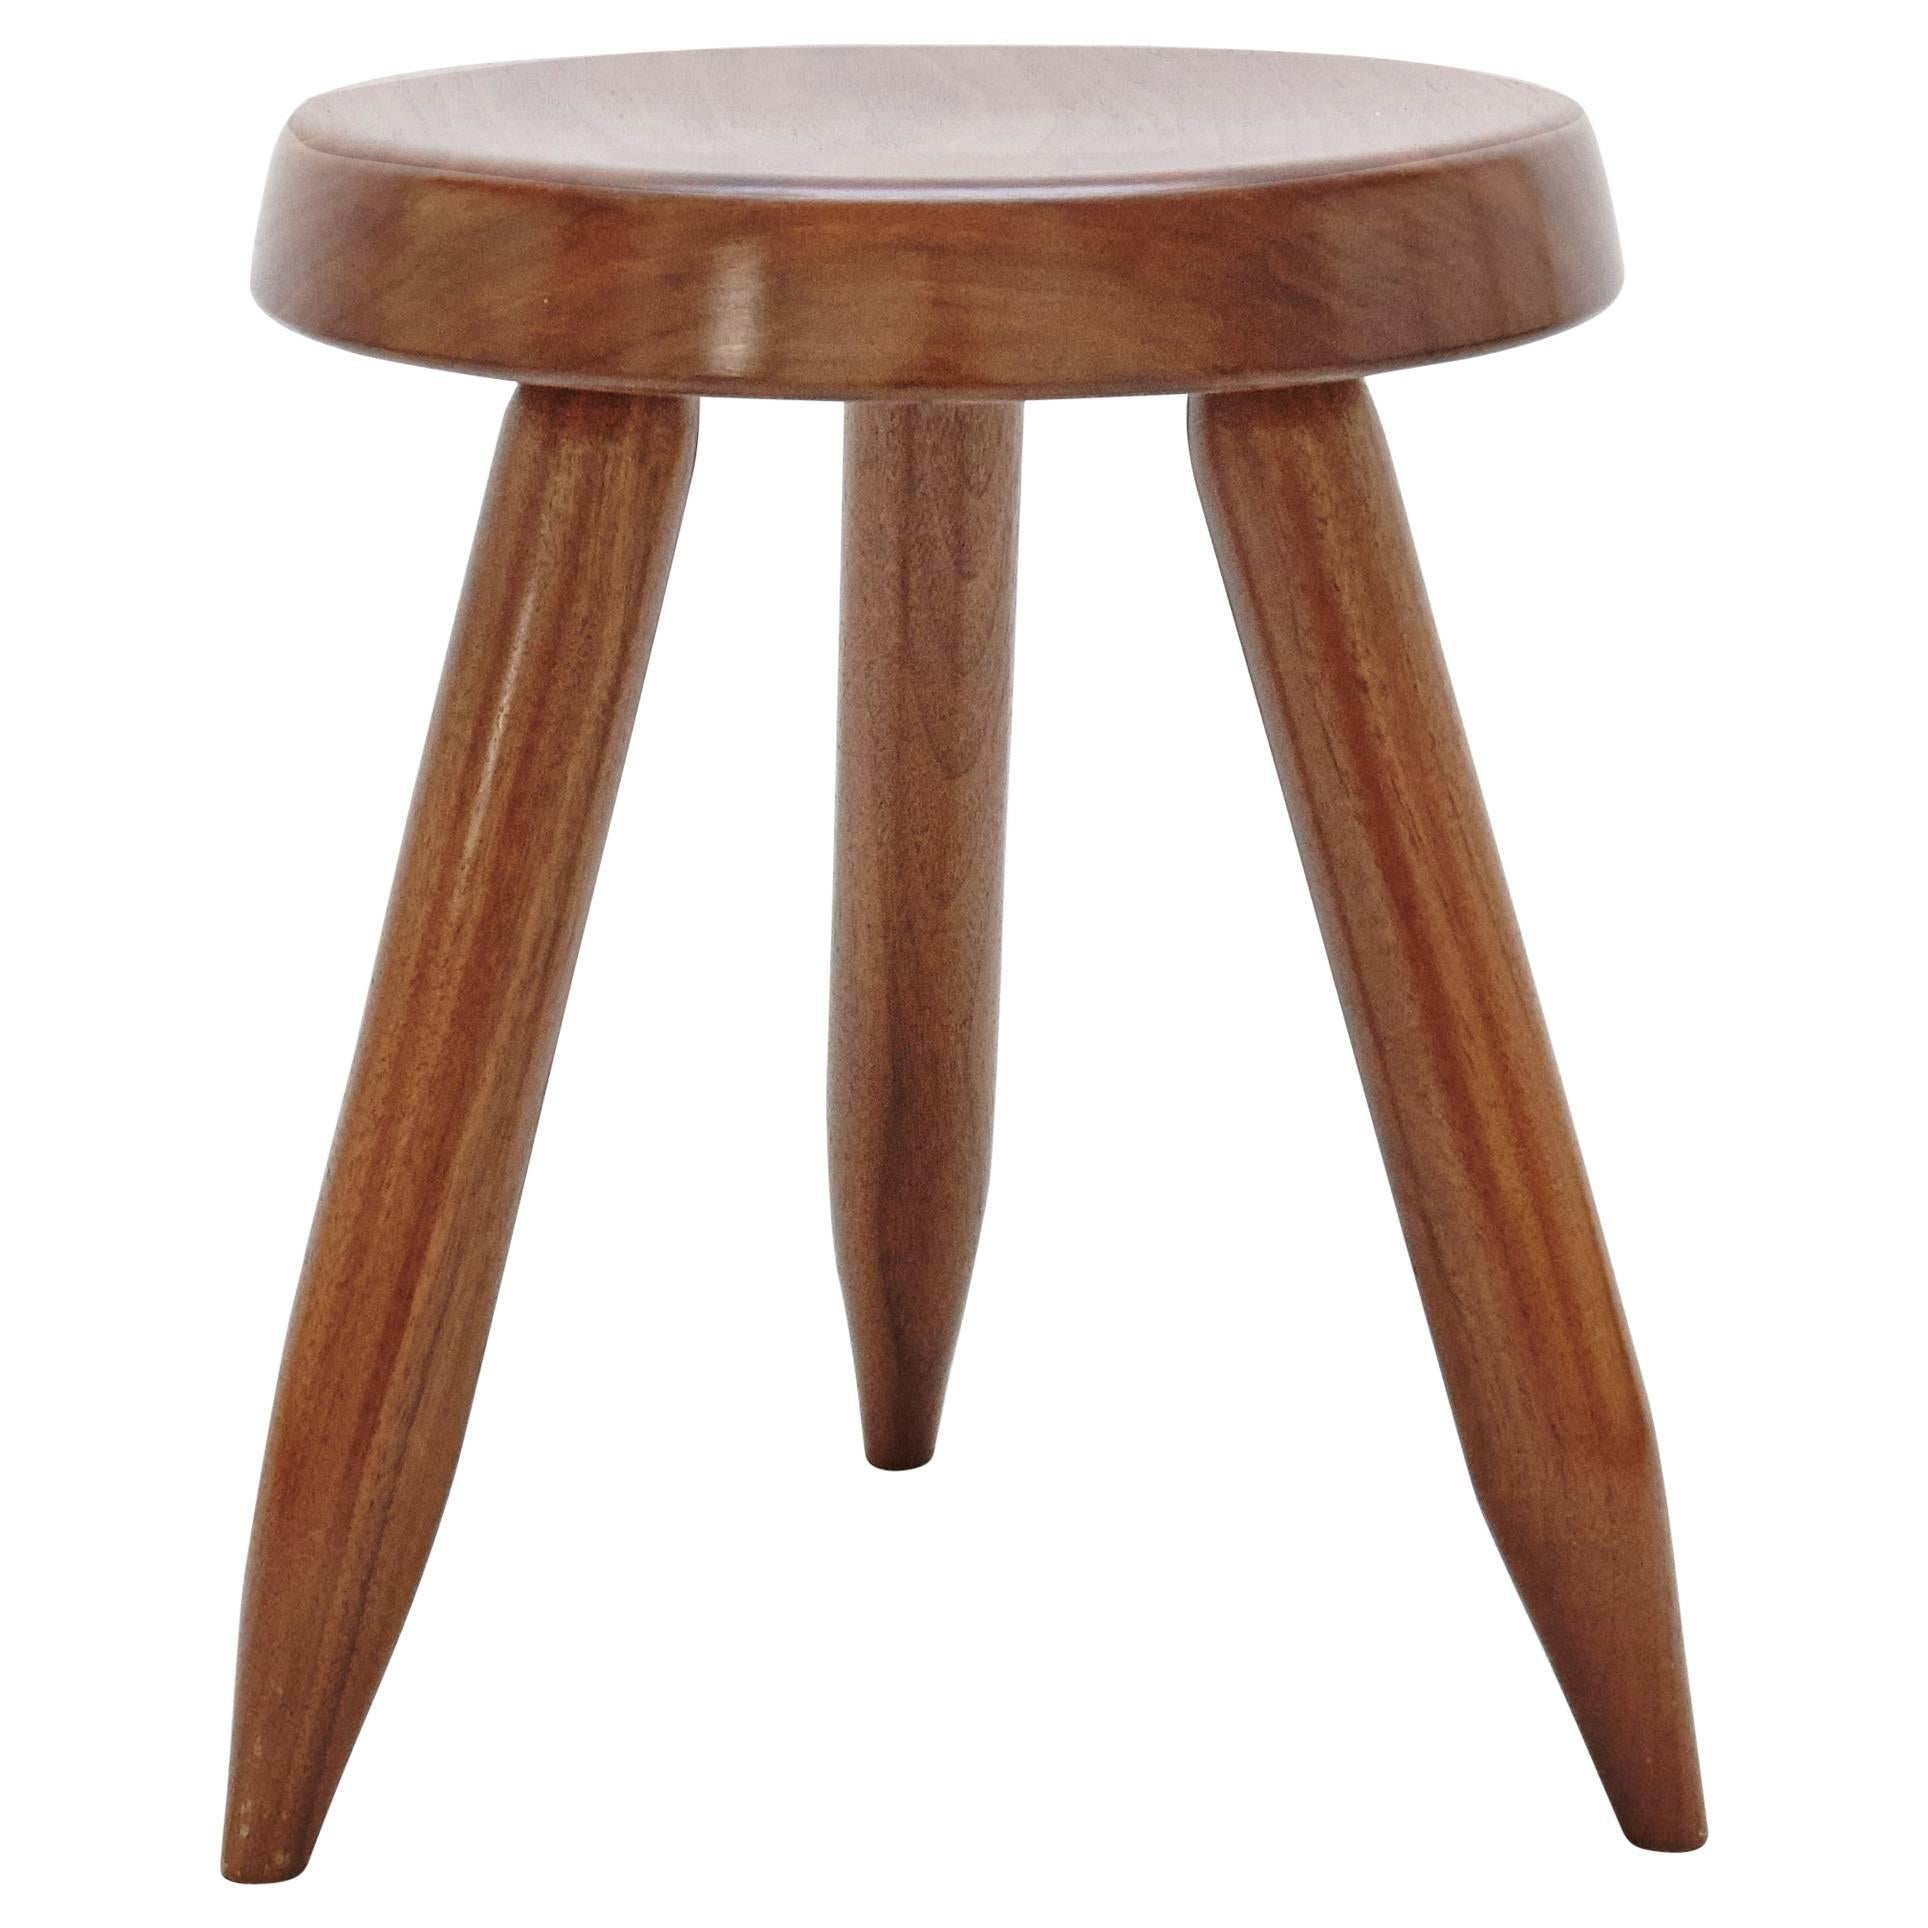 Stool after Charlotte Perriand